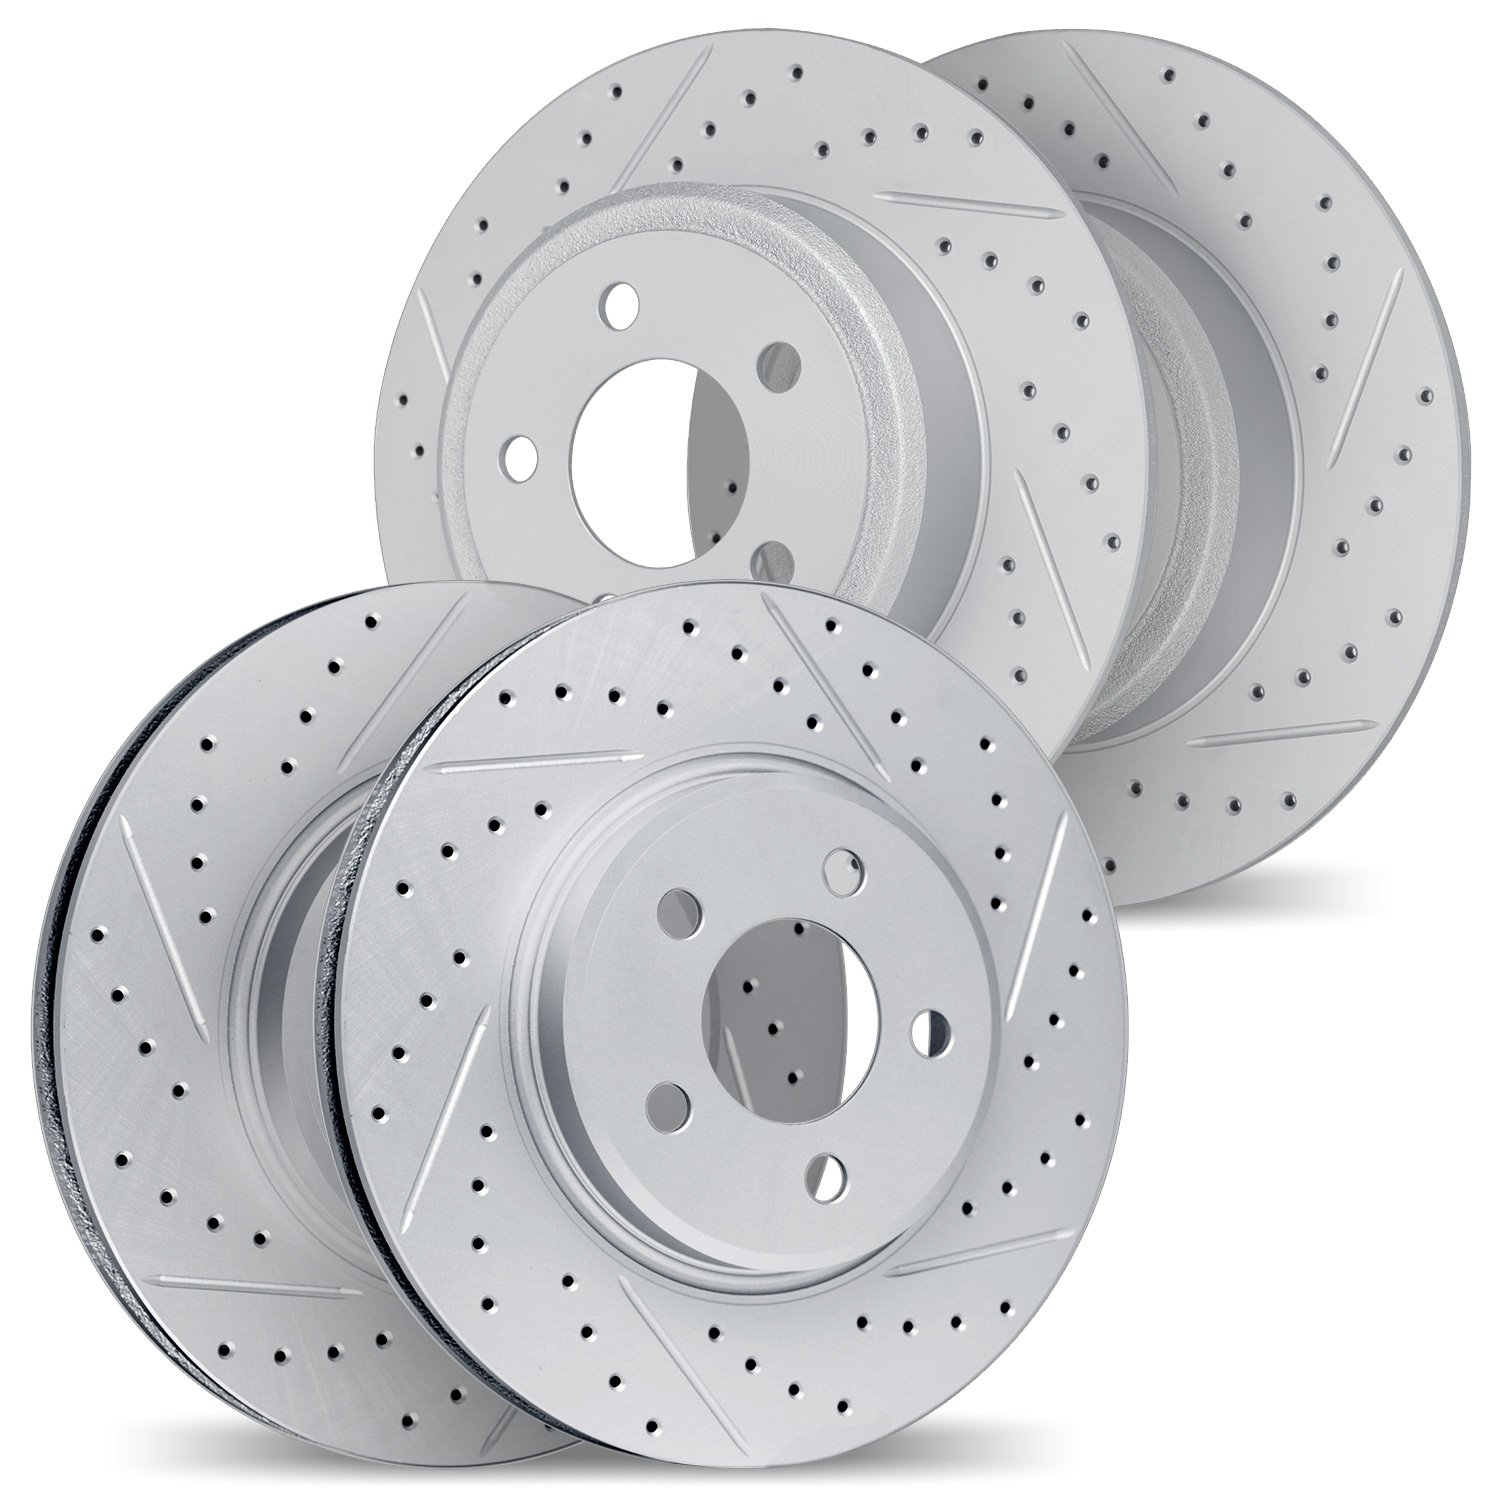 2004-63014 Geoperformance Drilled/Slotted Brake Rotors, 1996-2015 Mercedes-Benz, Position: Front and Rear